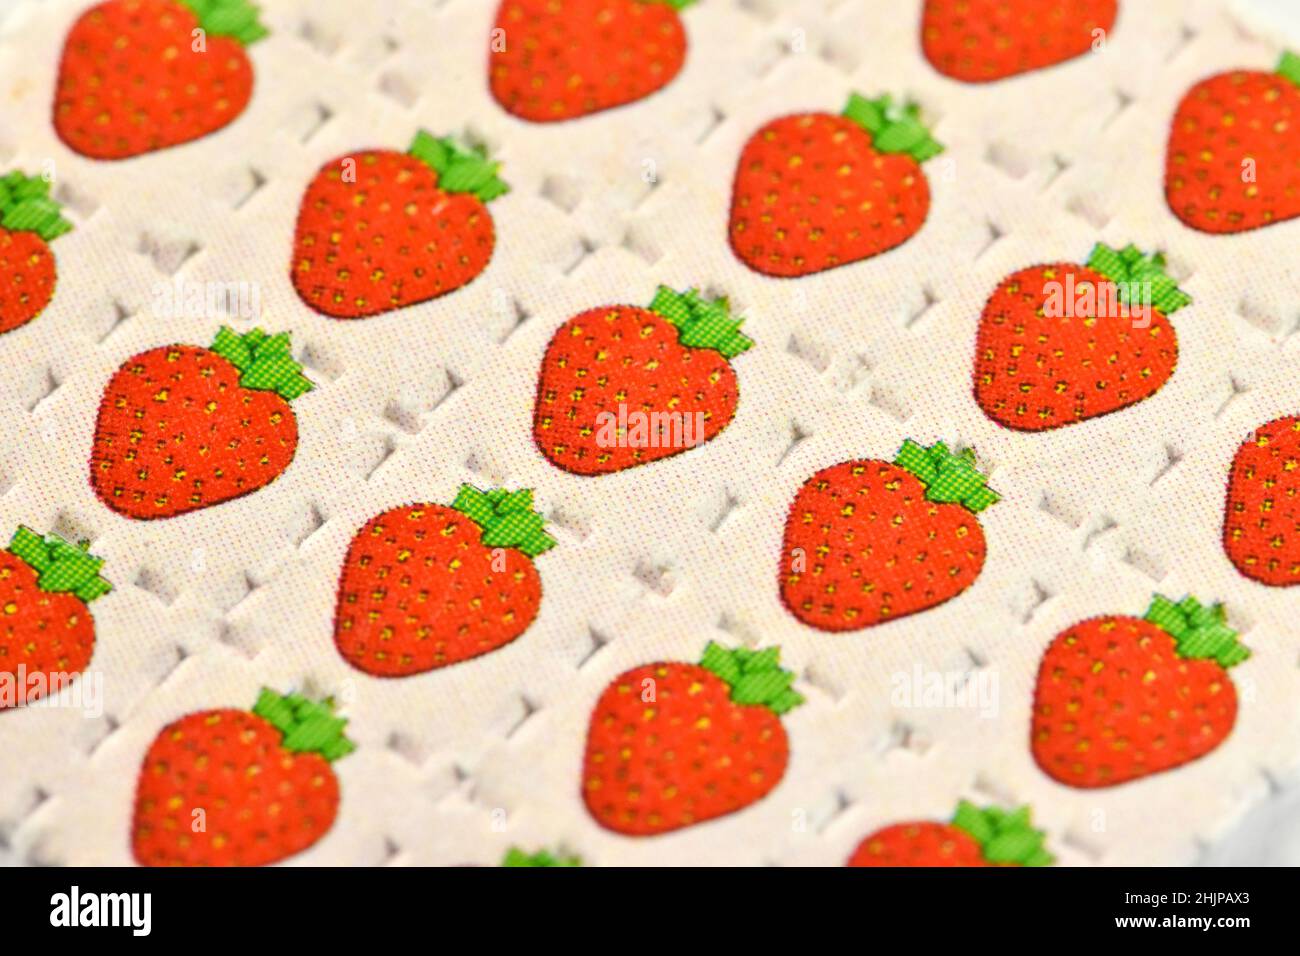 Strawberry Acid trips, Blotting paper impregnated with the drug L.S.D. Stock Photo